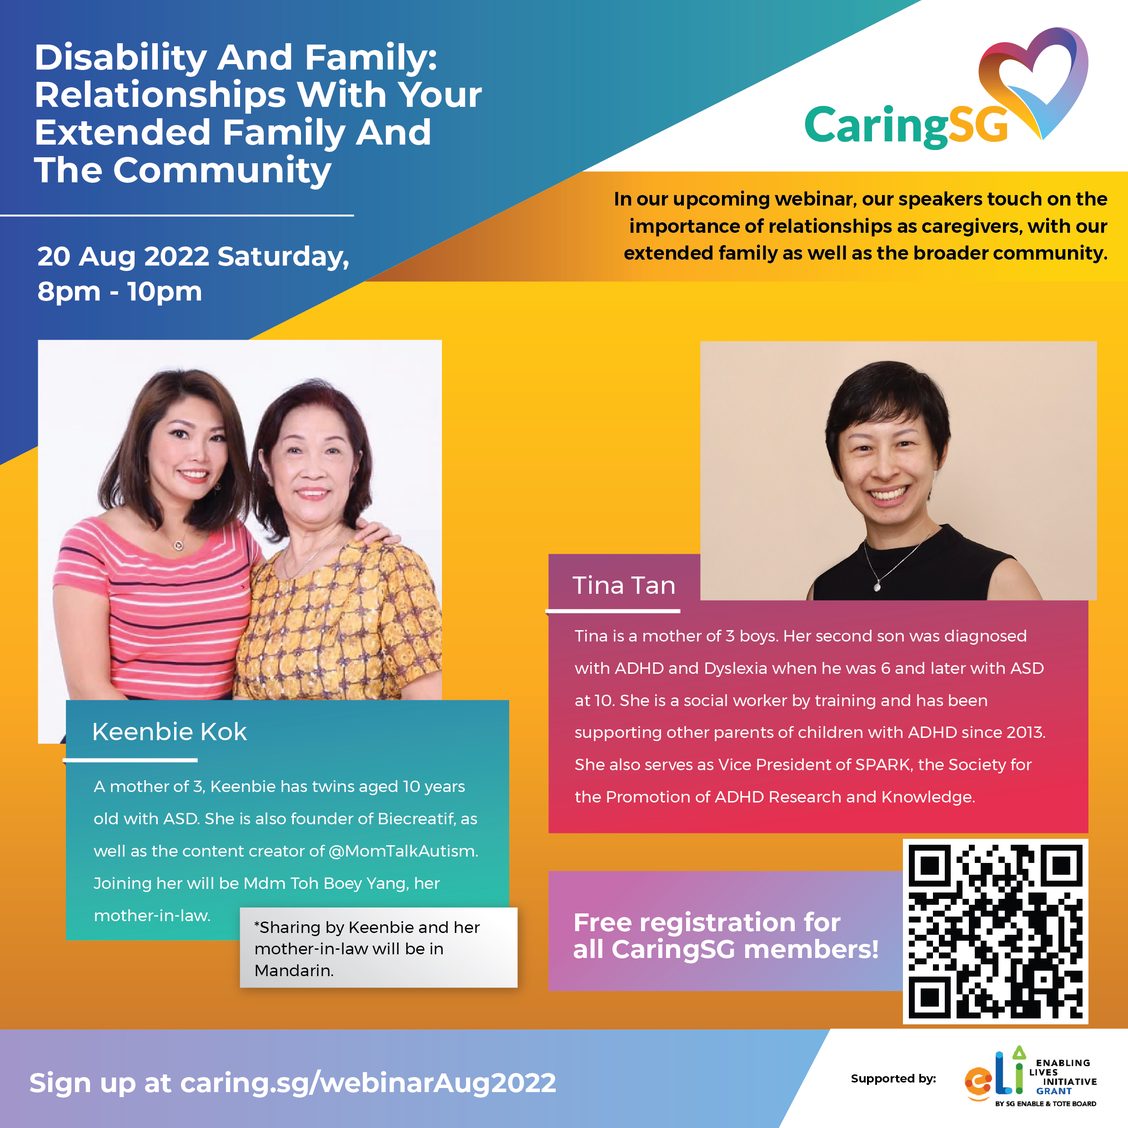 Disability And Family: Relationships With Your Extended Family And The Community